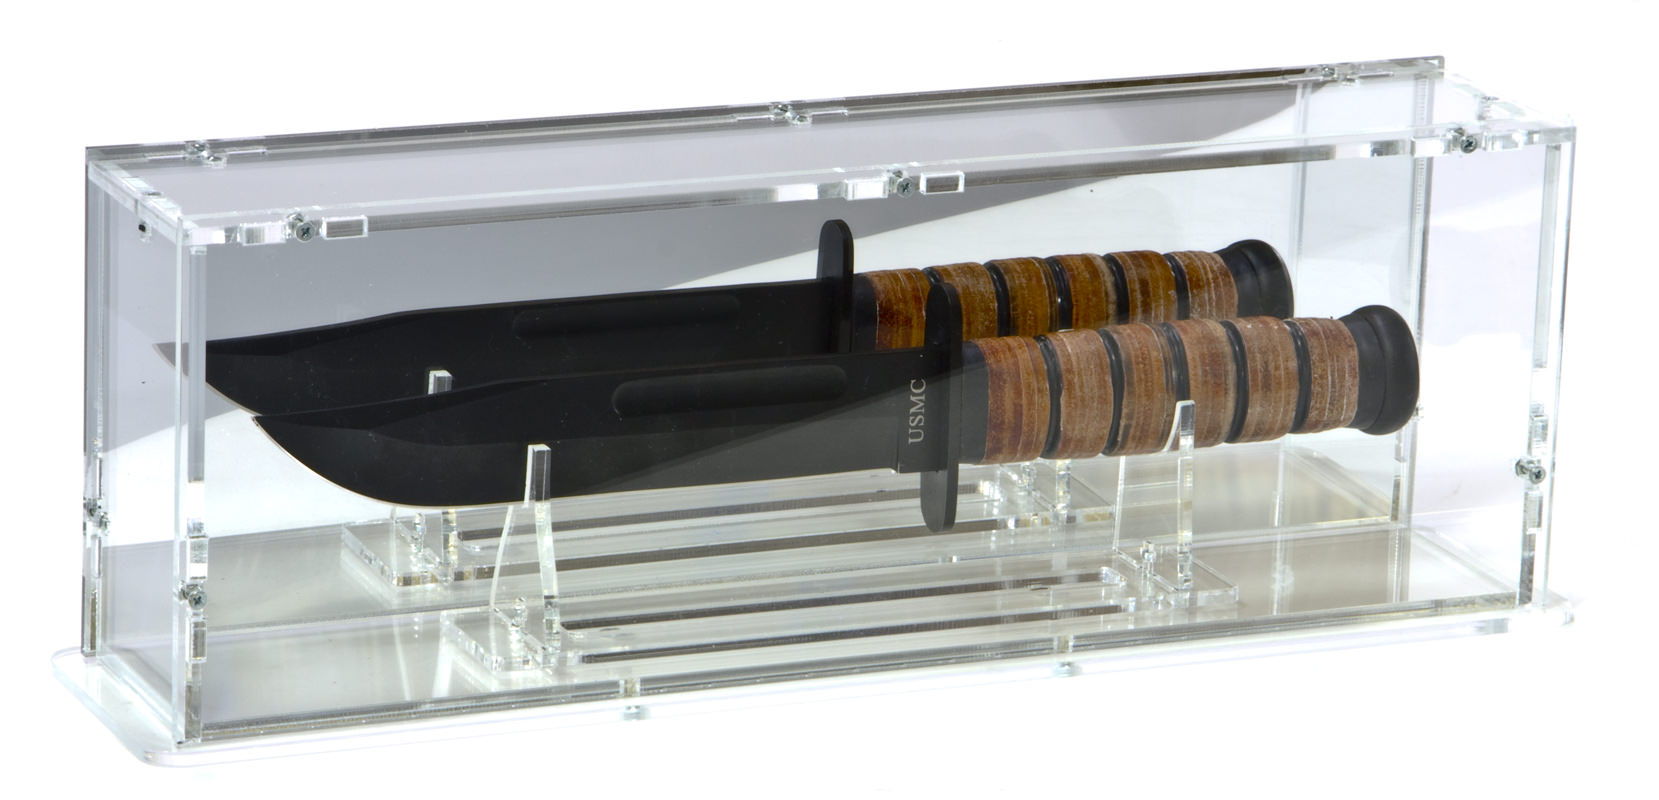 Front Perspective of the Knife Display Case